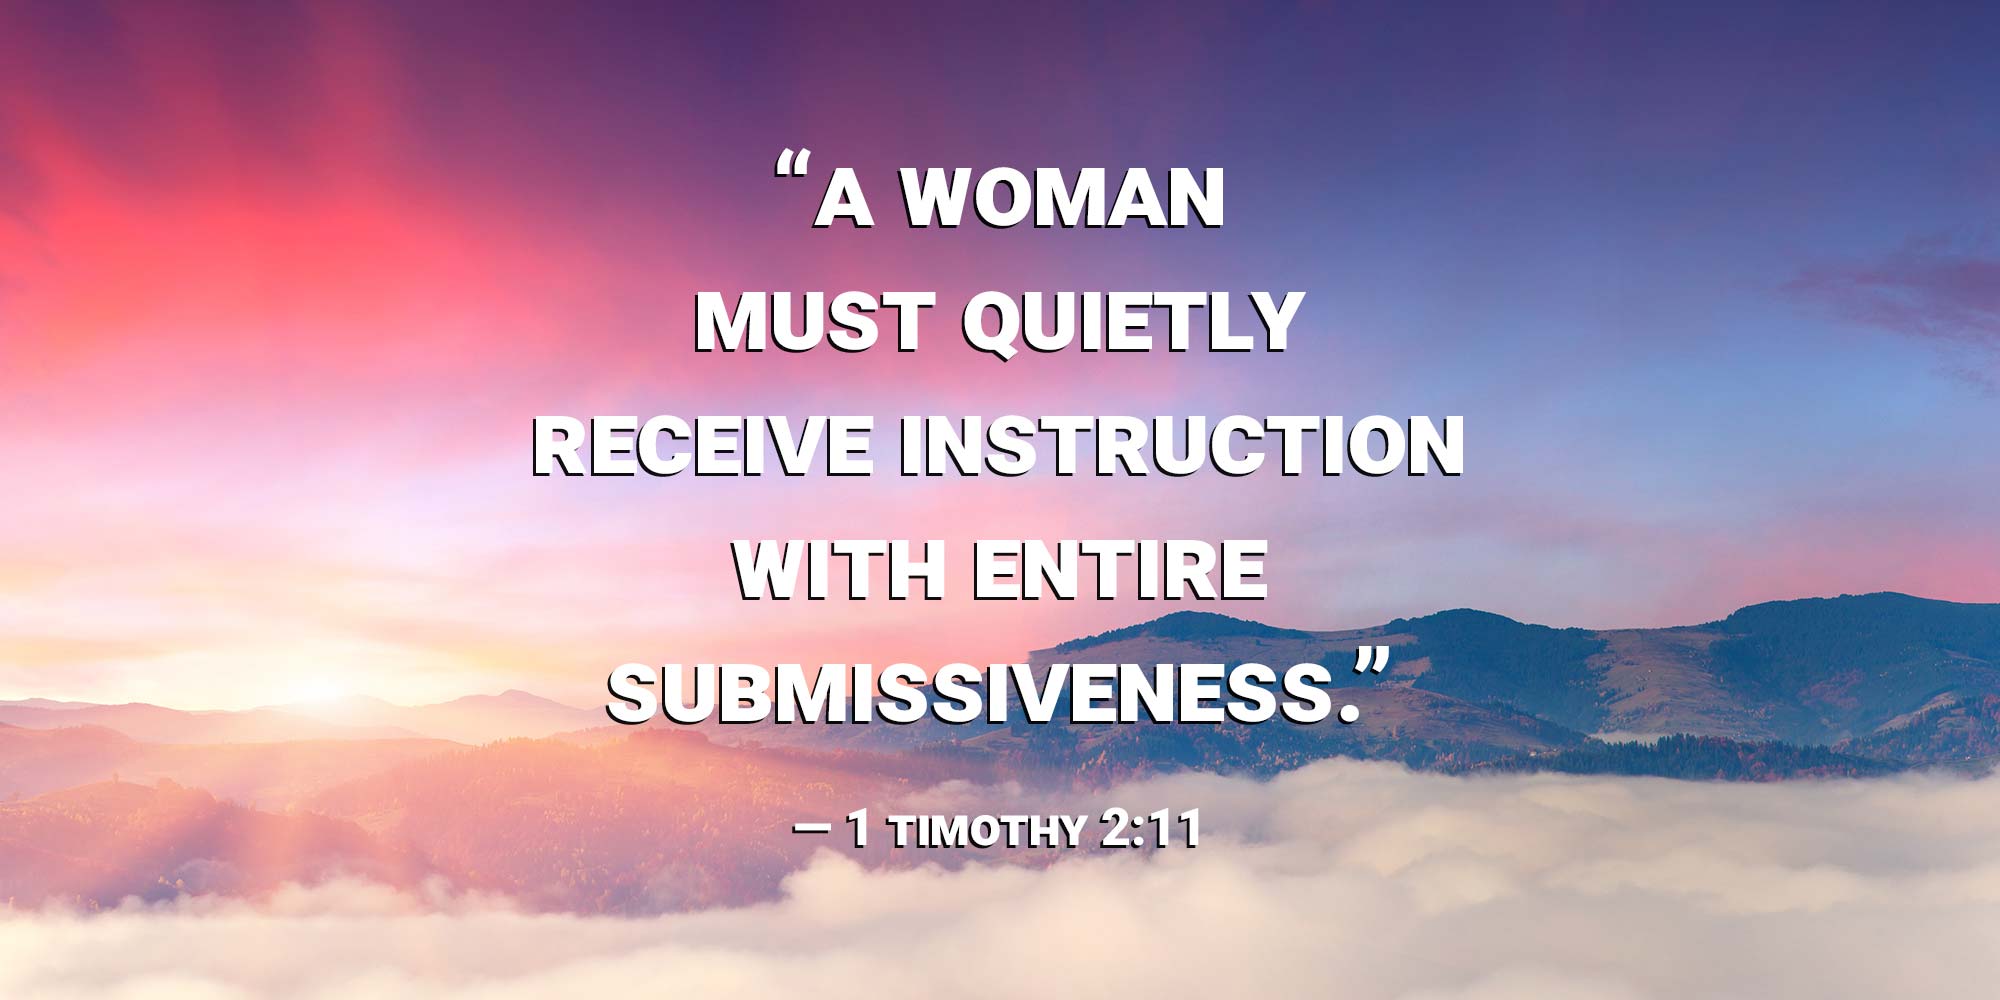 "a woman must quietly receive instruction with entire submissiveness." — 1 Timothy 2:11